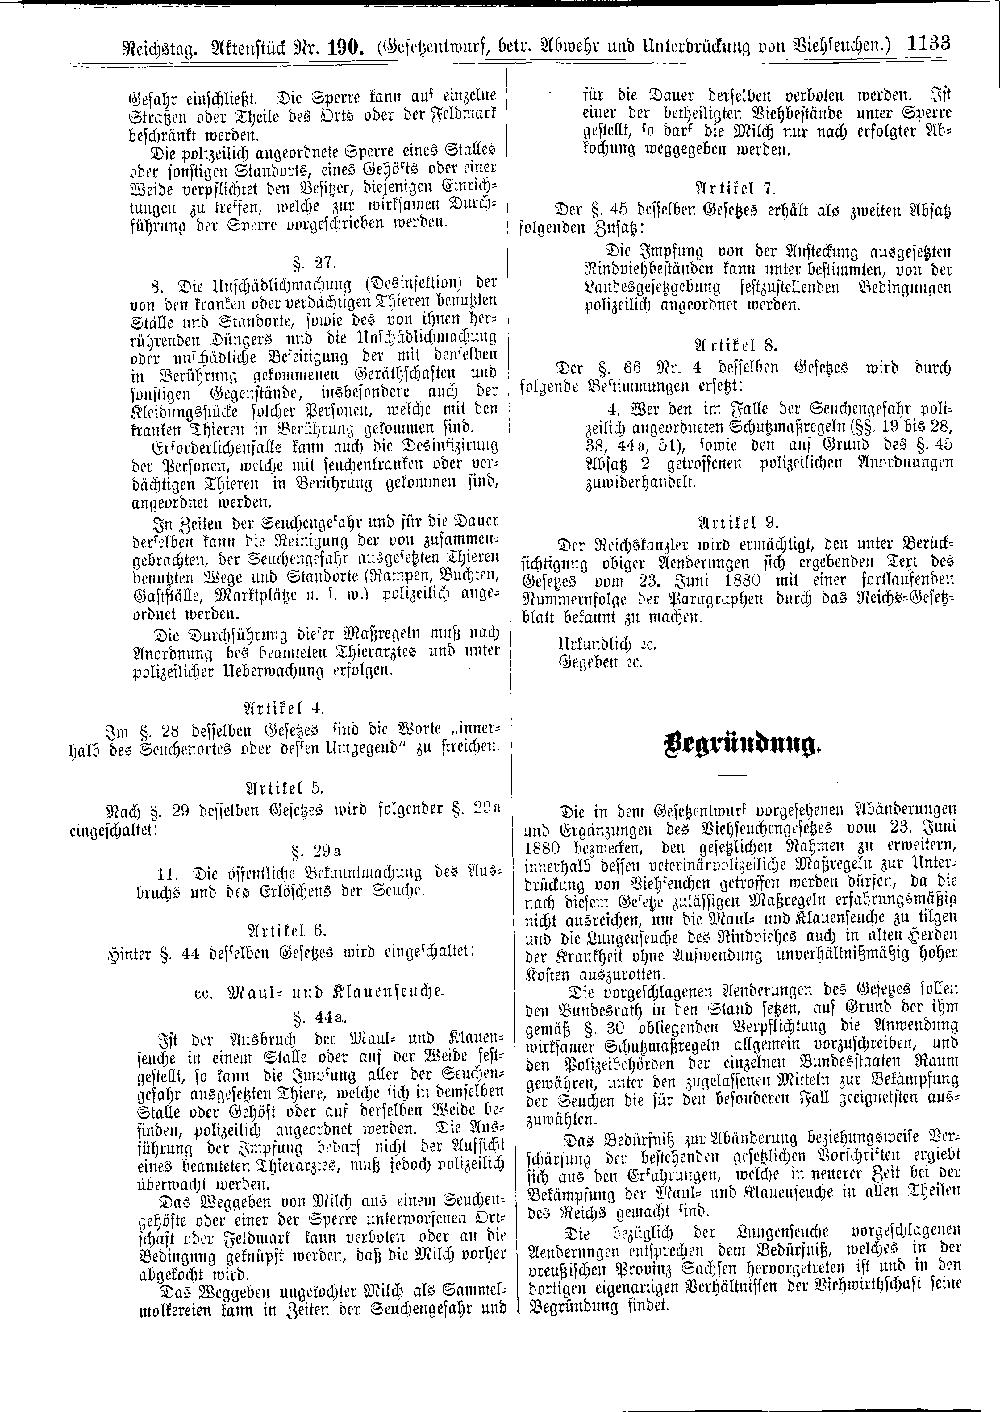 Scan of page 1133